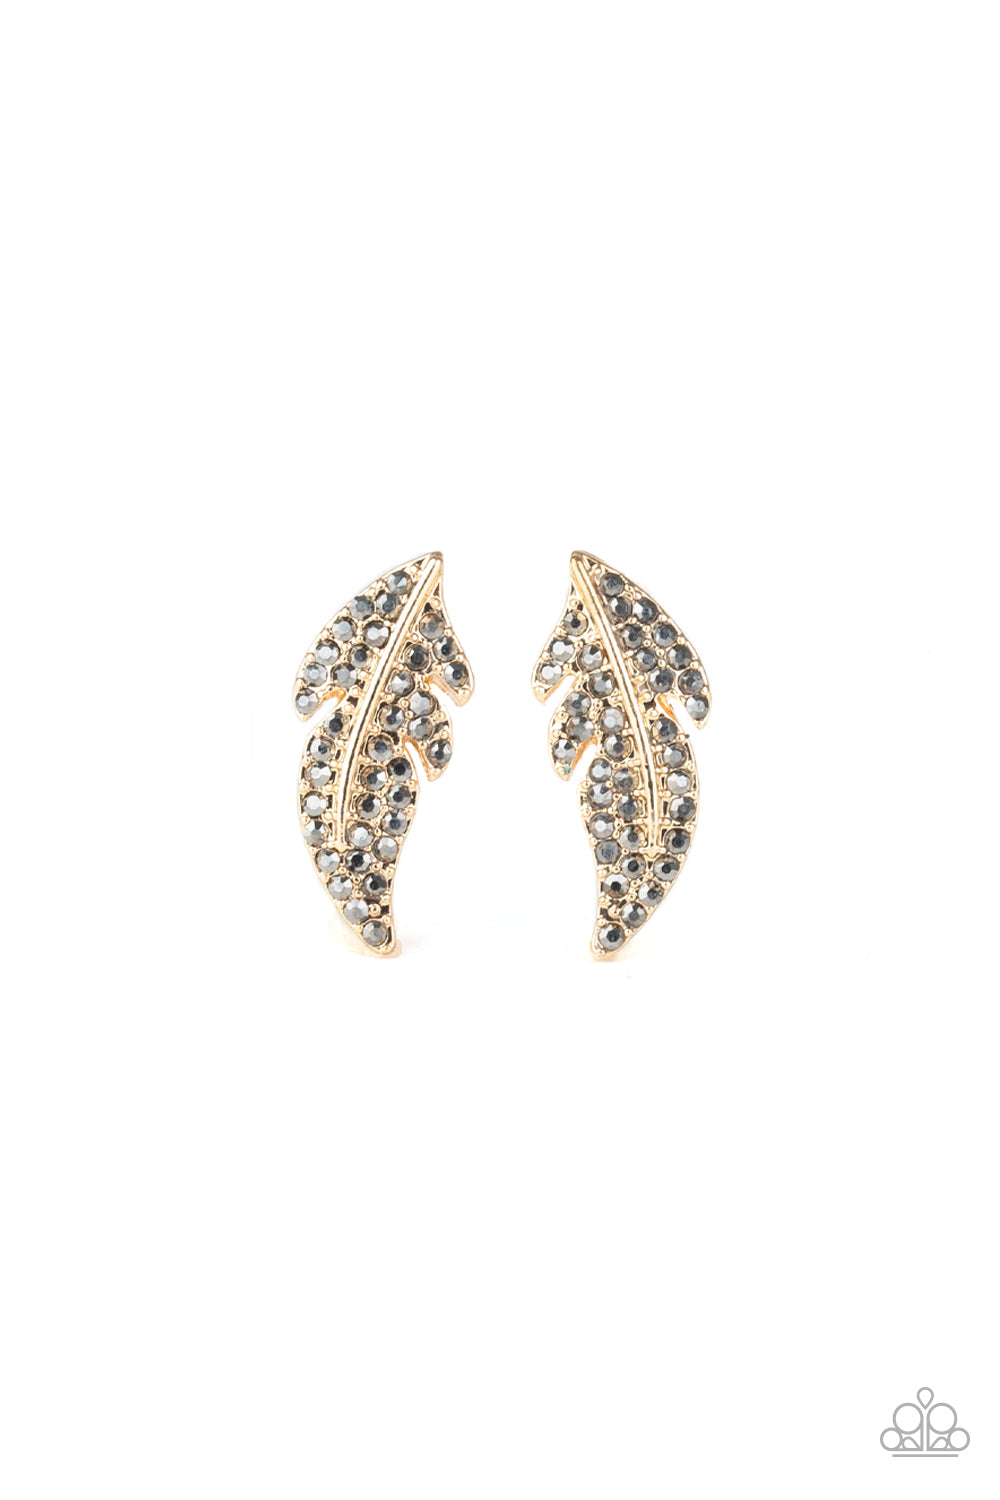 Feathered Fortune - gold - Paparazzi earrings